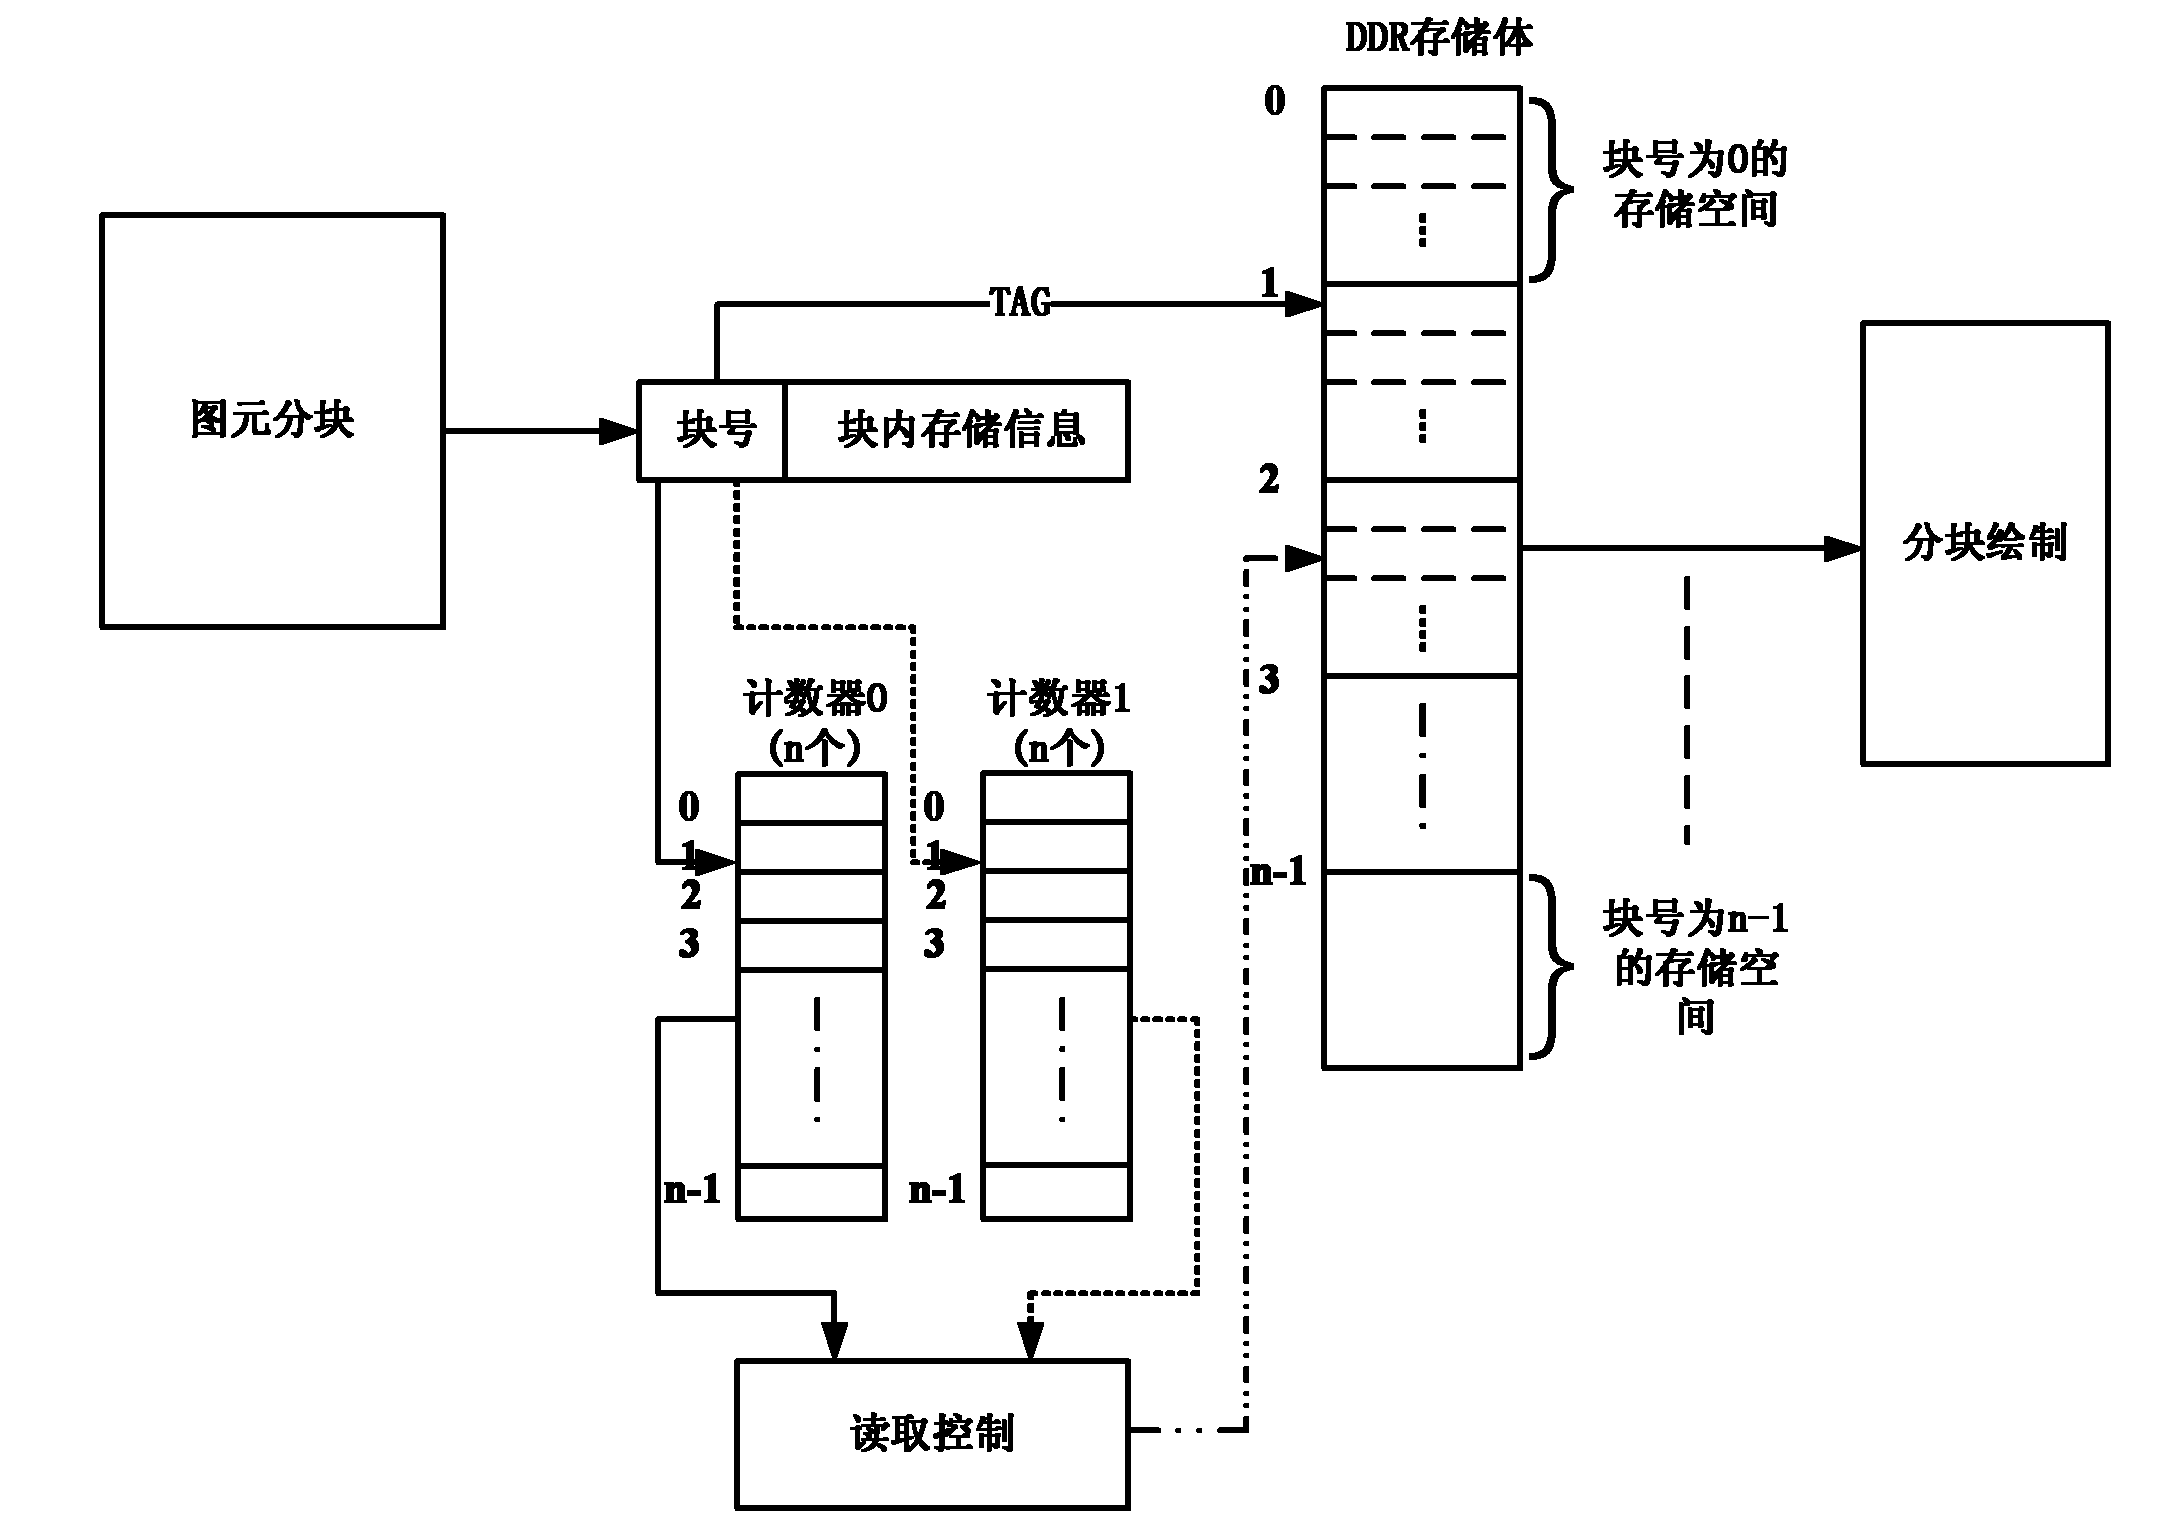 Realization of tile cache strategy in graphics processing unit (GPU) based on tile based rendering